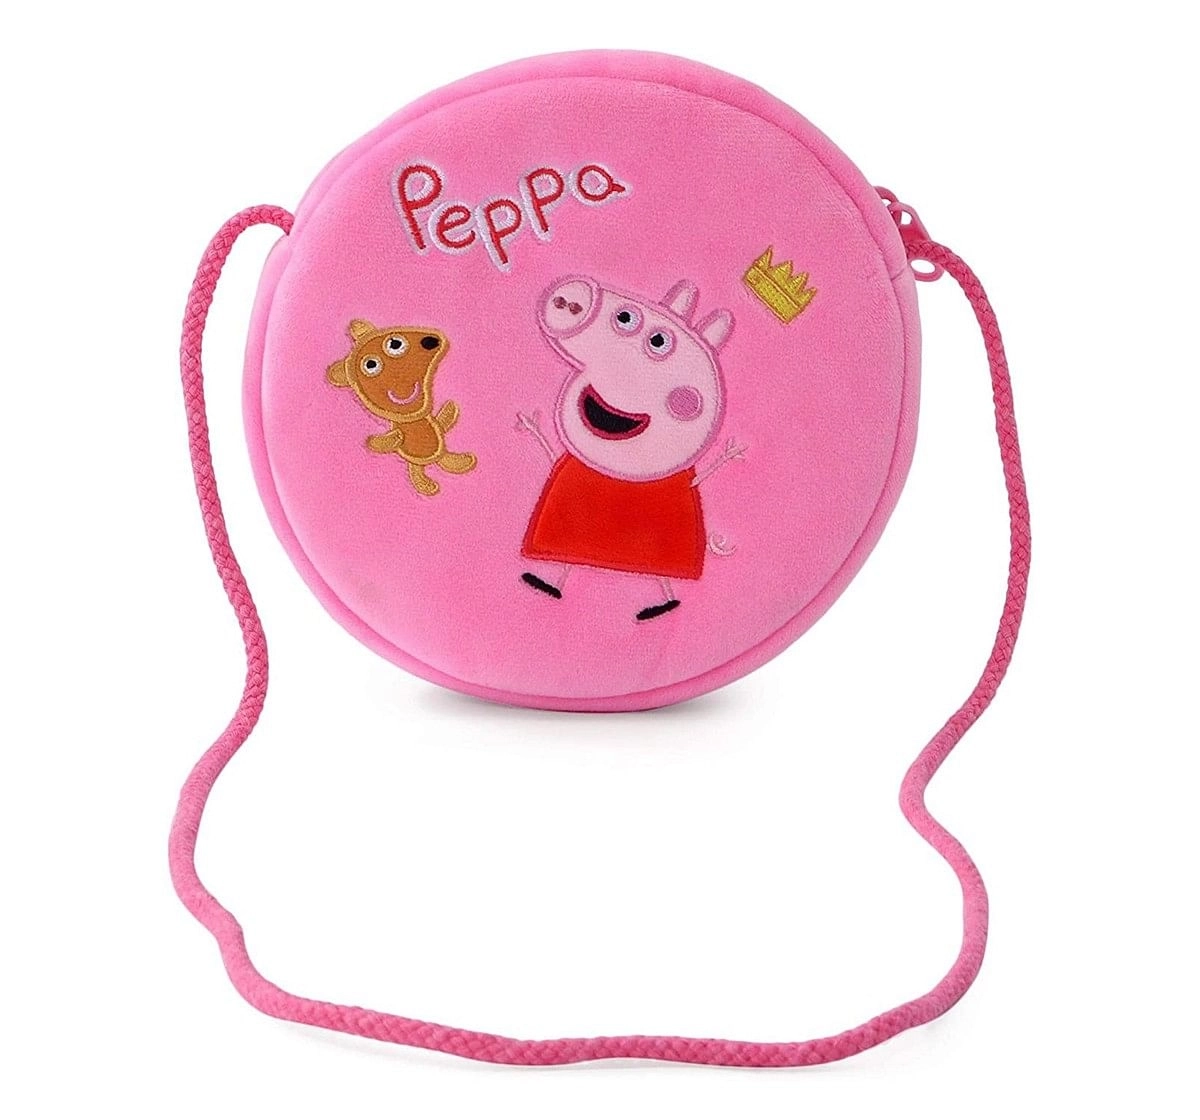 Peppa Pig with Bear Round Sling Bag Plush Accessory for age 3Y+ - 16 Cm (Pink)